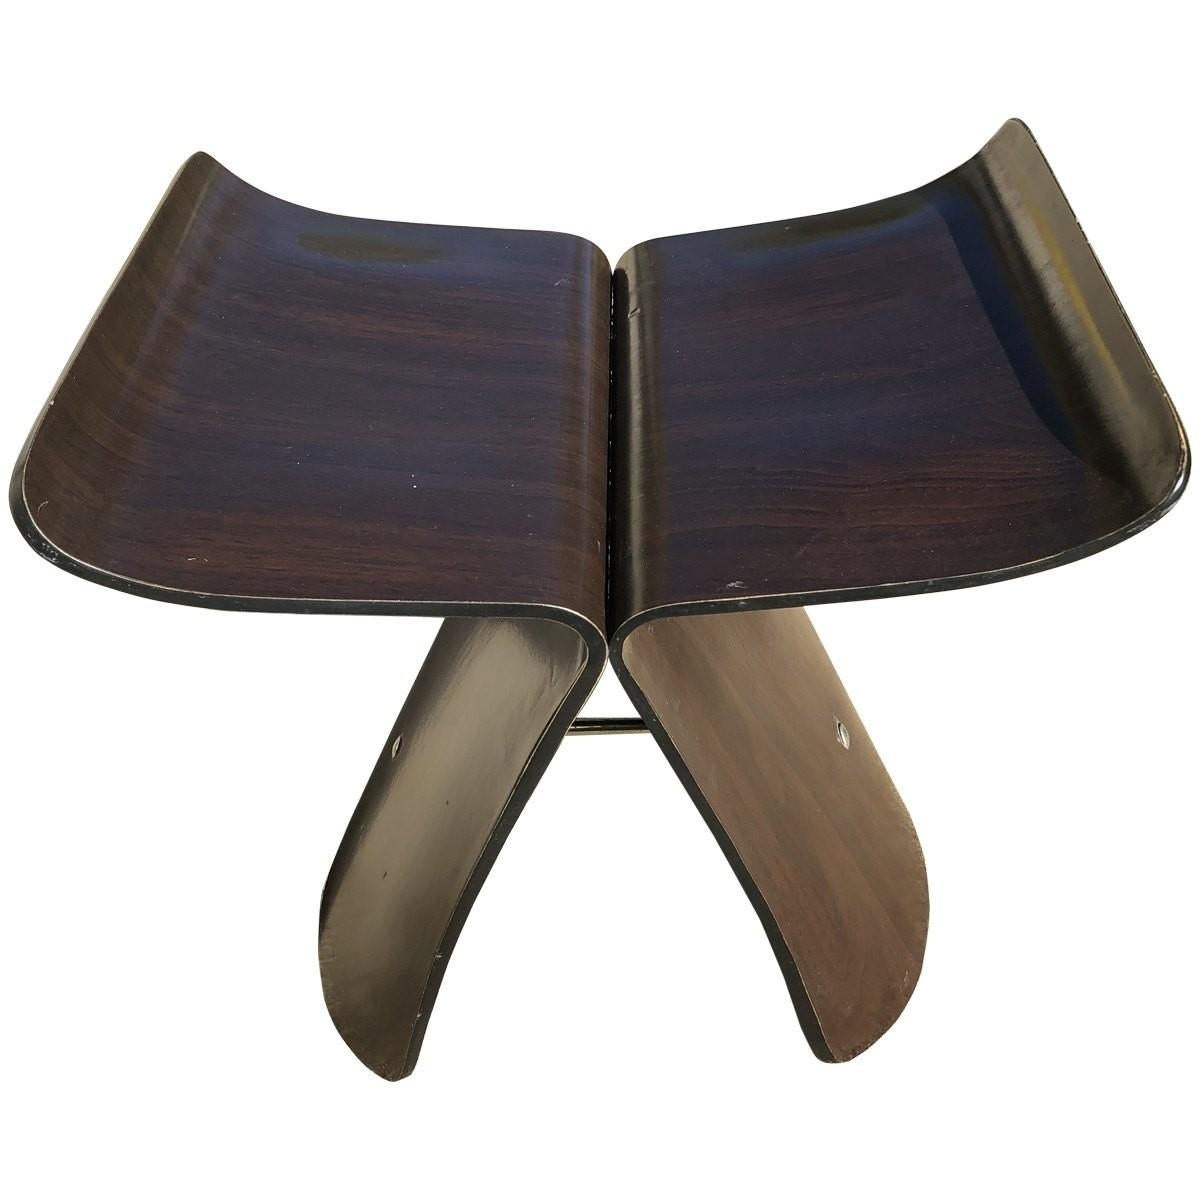 Original Sori Yanagi butterfly stools. Japanese product designer Sori Yanagi created home items with a high level of modernist and minimalist elements. Yanagi designed this molded plywood butterfly stool for Tendo. It is made with a dark brown